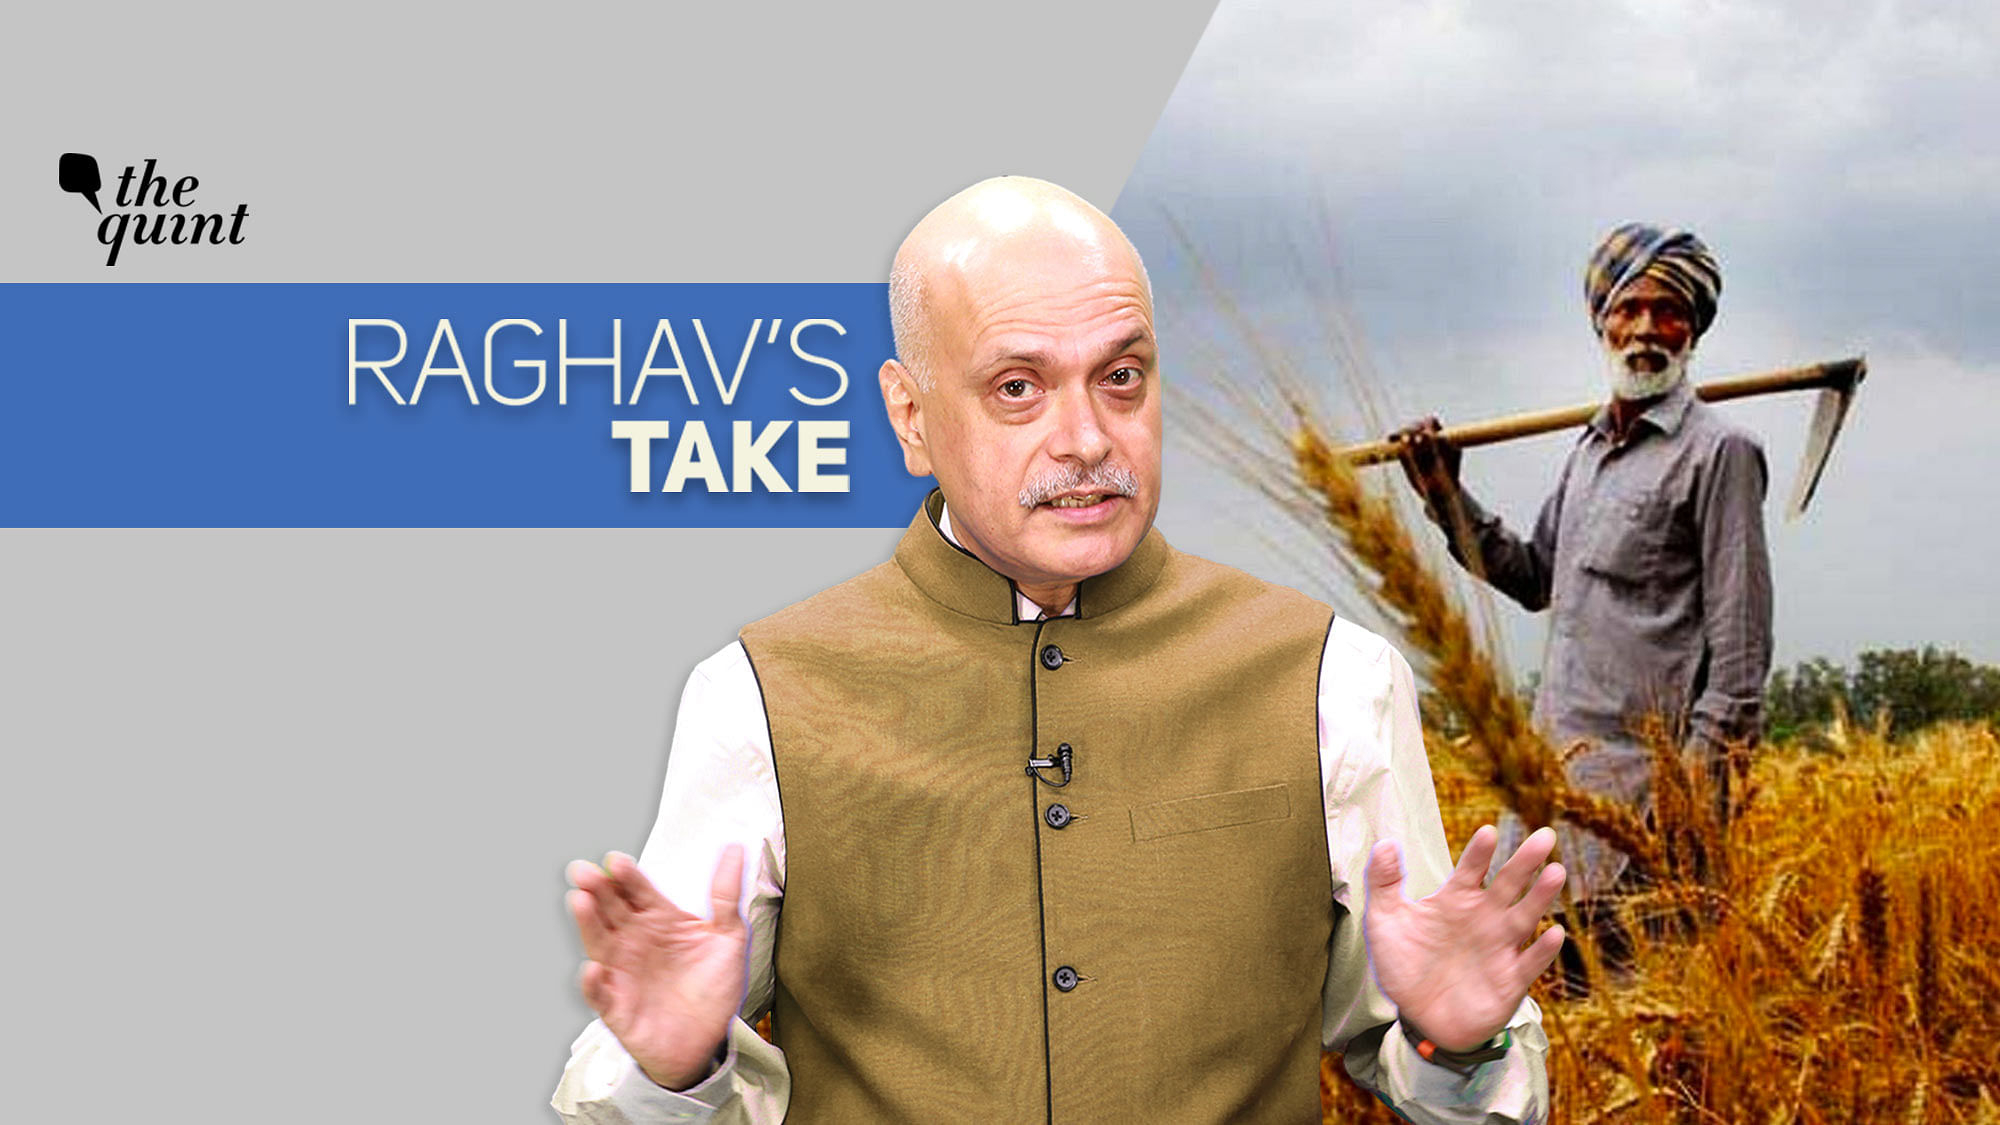 From the Government increasing MSP for Kharif Paddy crop to how Indian politics is now mimicking the Internet, The Quint’s Editor-in-Chief Raghav Bahl shares his views on some recent, and pertinent, developments.